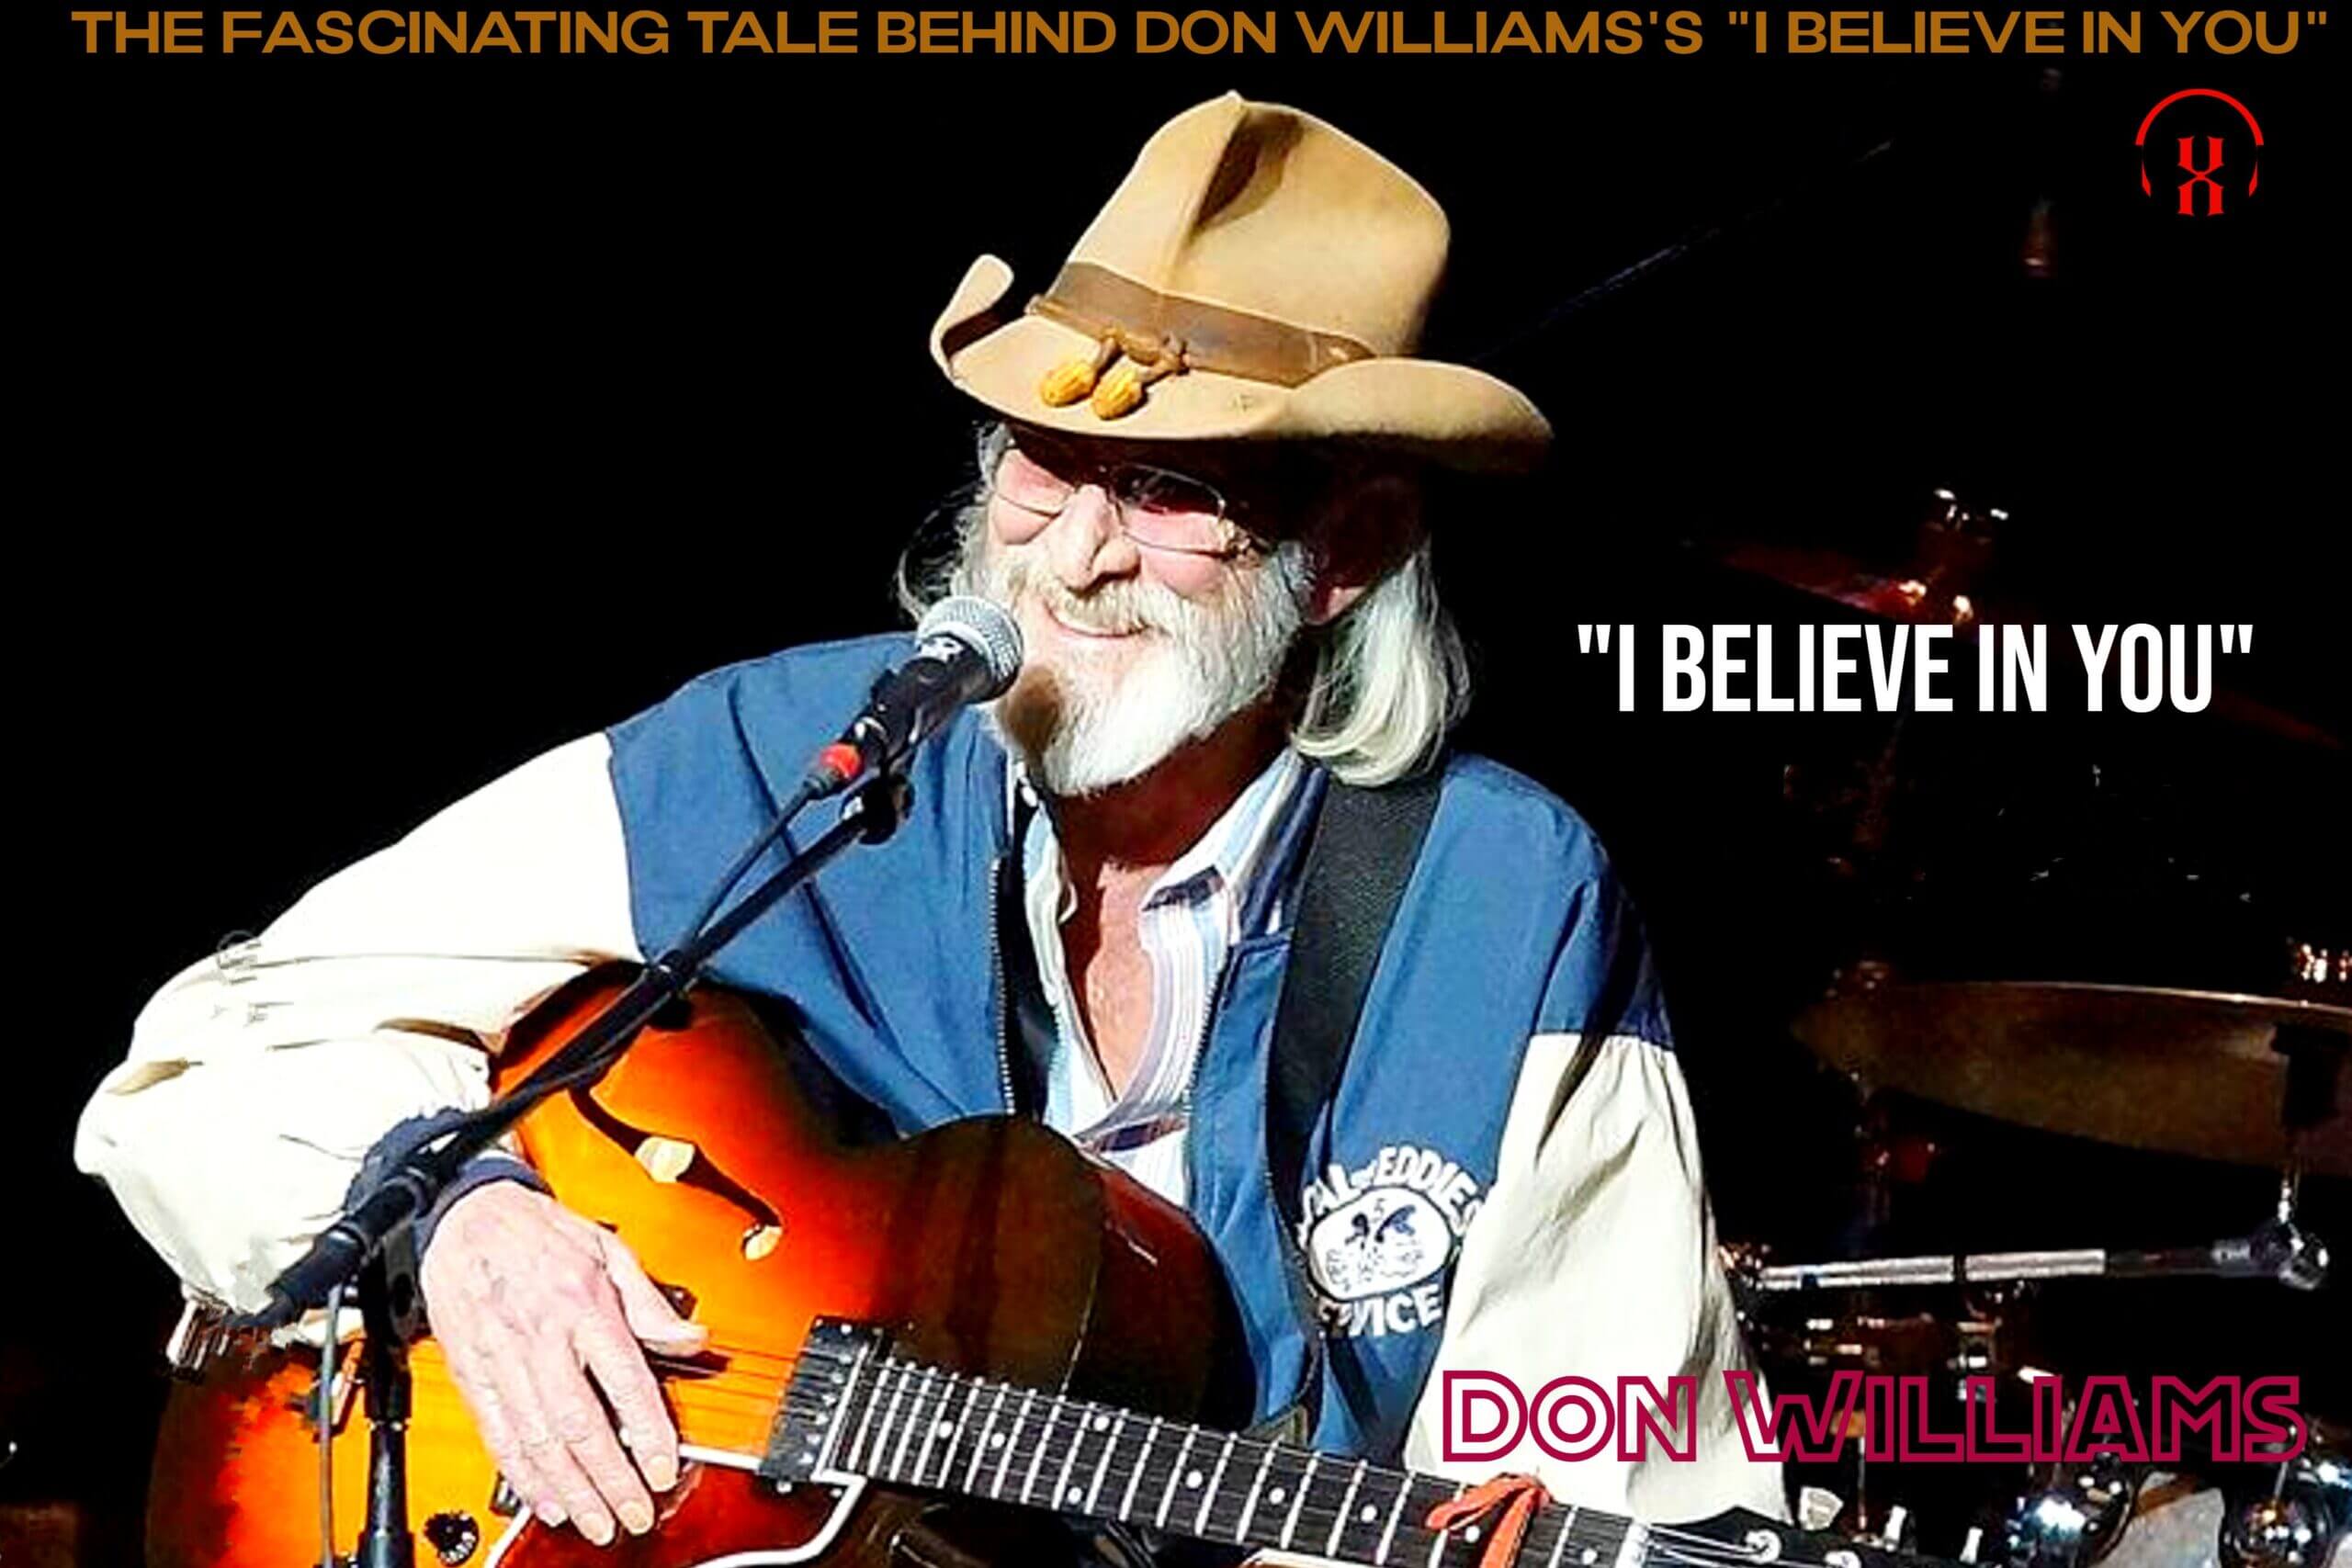 Don Williams's "I Believe In You"